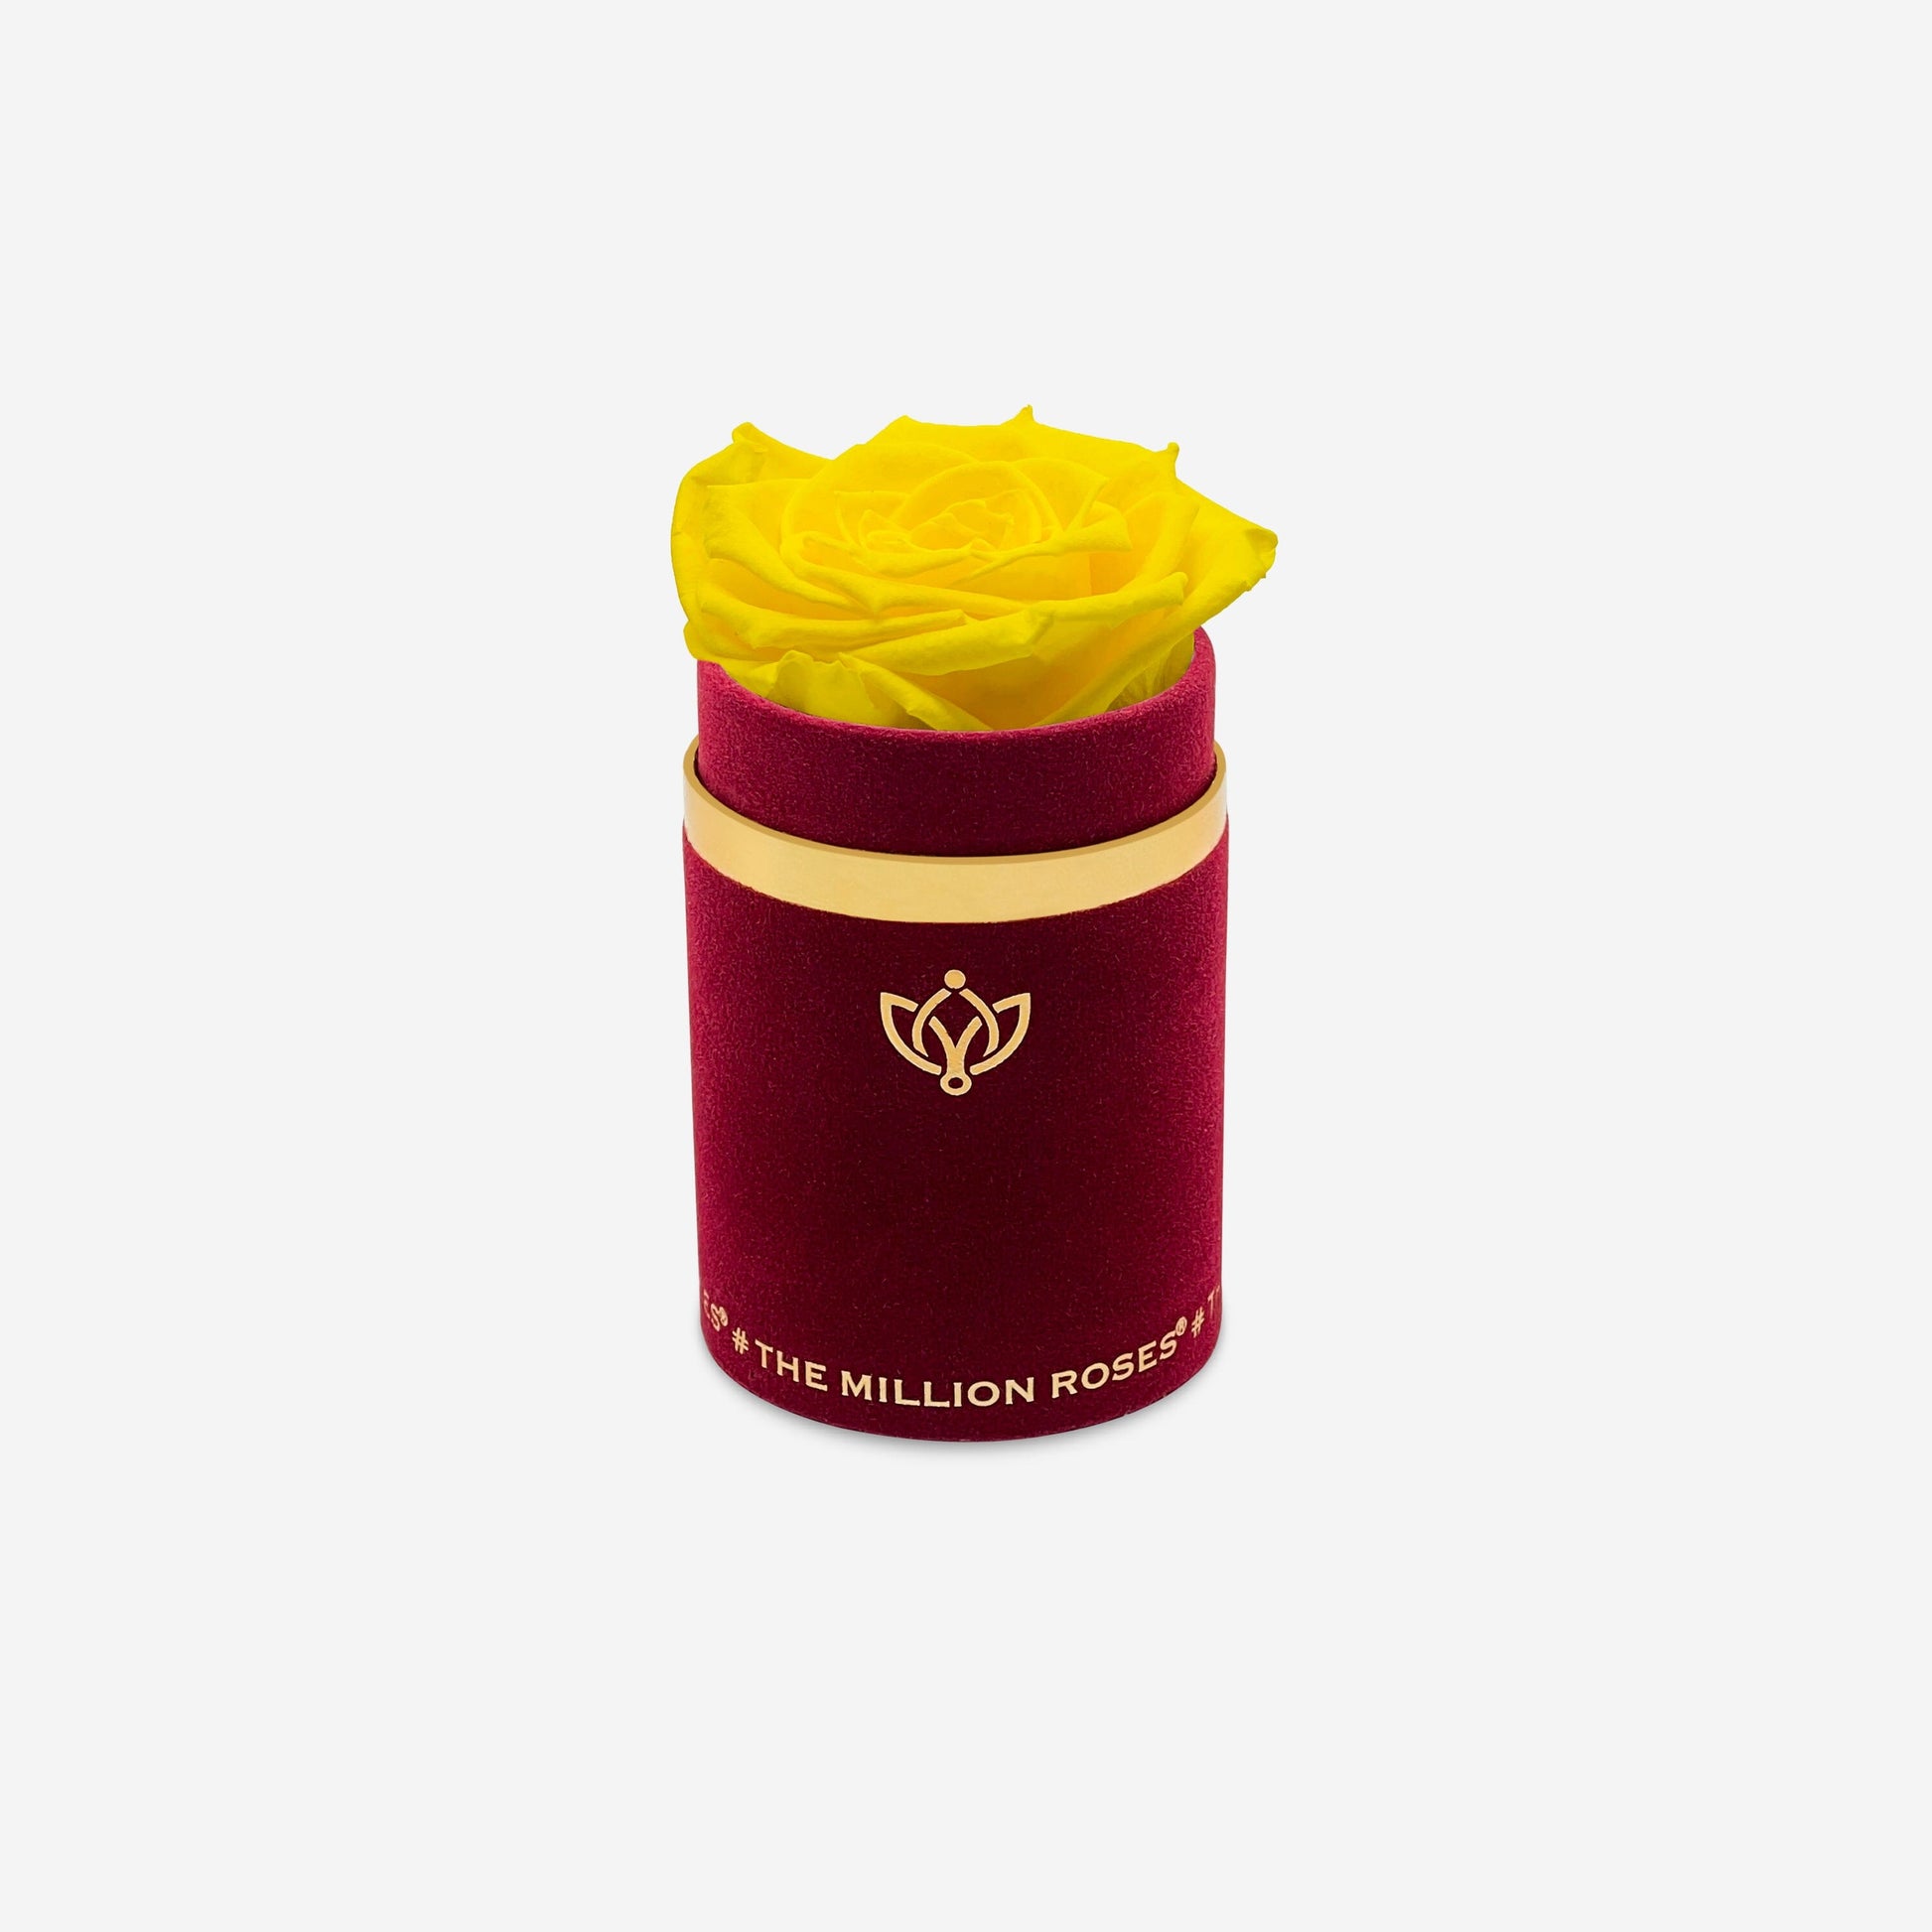 Single Bordeaux Suede Box | Yellow Rose - The Million Roses